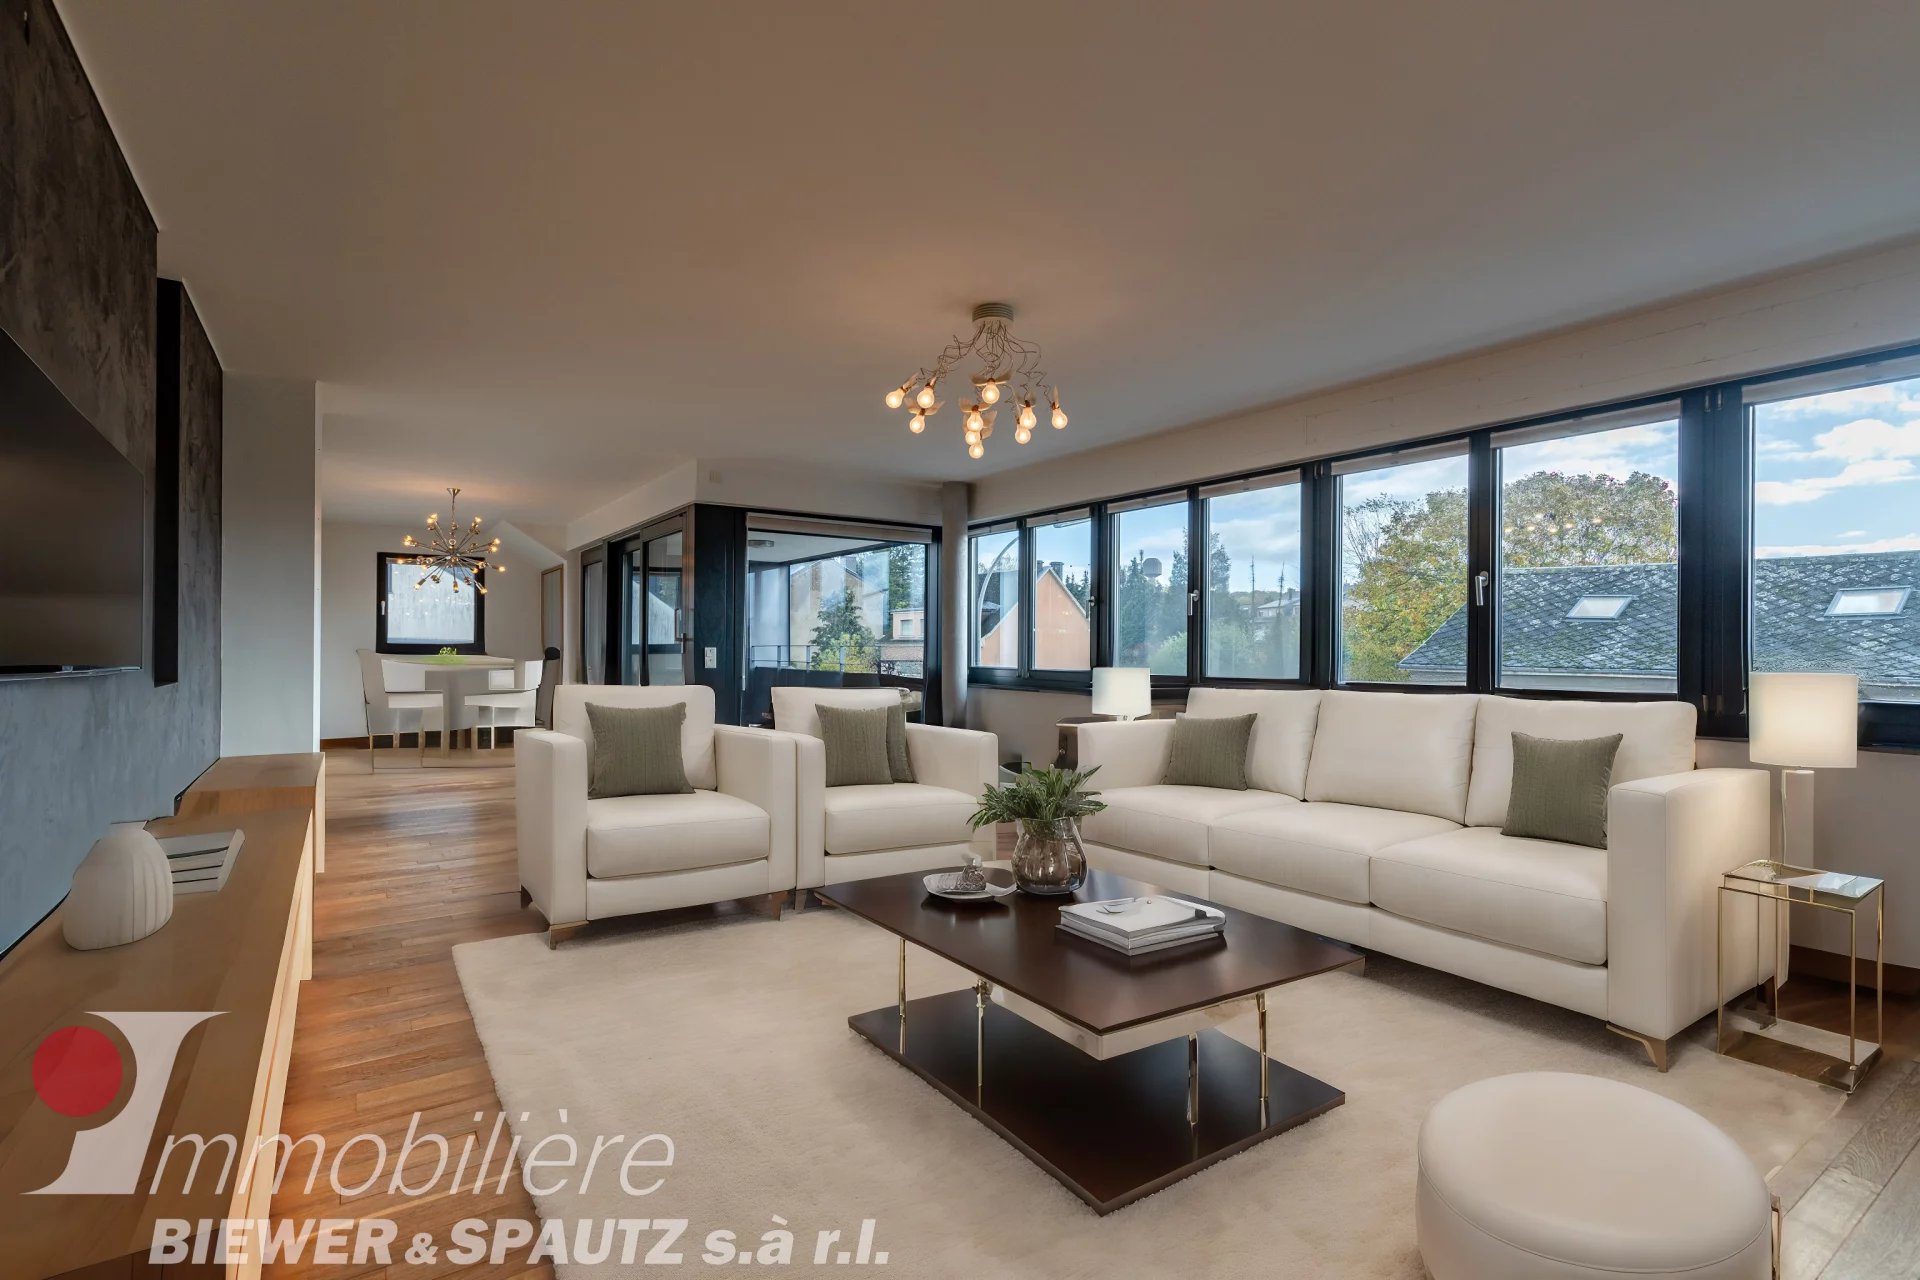 FOR SALE - Penthouse with 2 bedrooms in Pontpierre